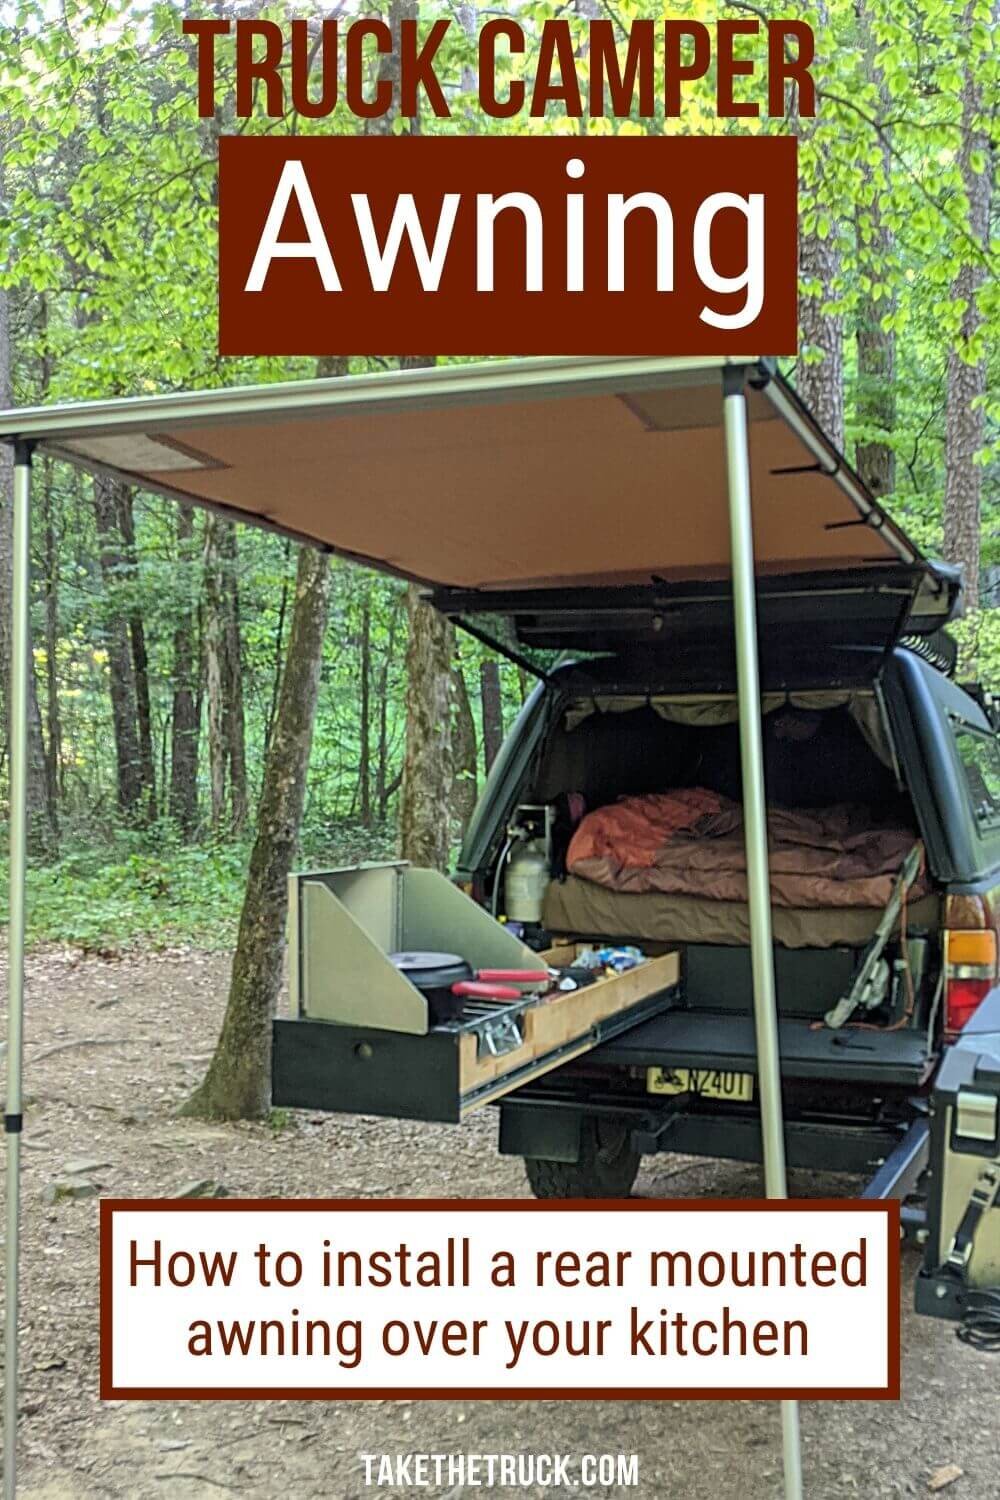 Researching truck camper awnings? This post tells how to mount a truck shell camper awning off the back of the truck. Having a truck camper rear awning keeps your kitchen out of the rain and sun.